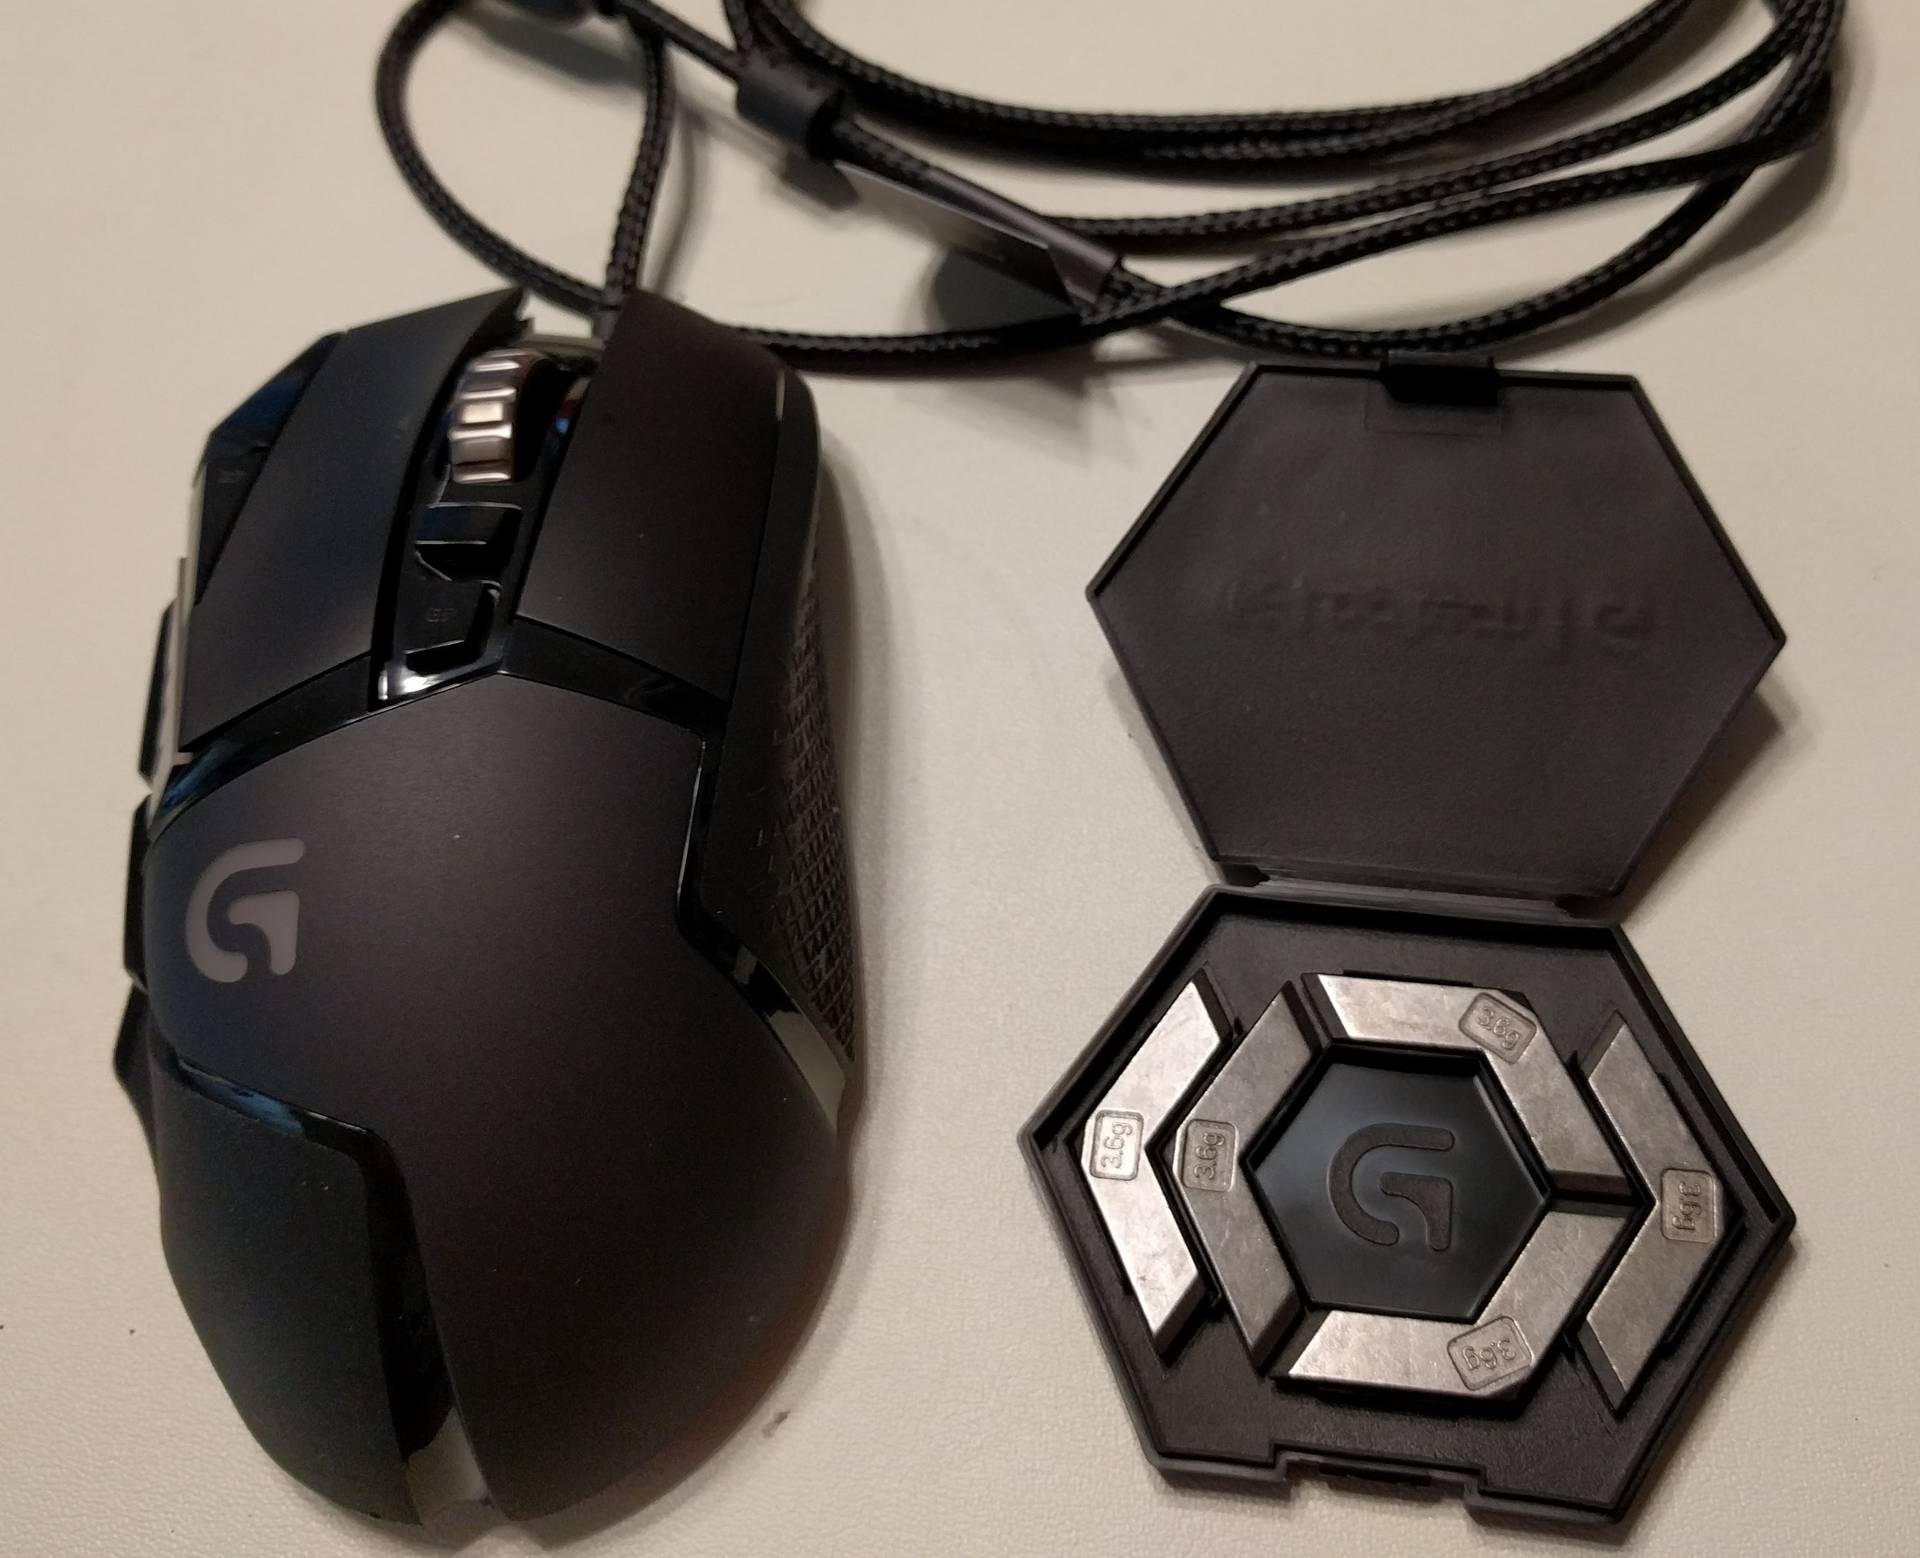 Logitech G502 Spectrum Review - Without the